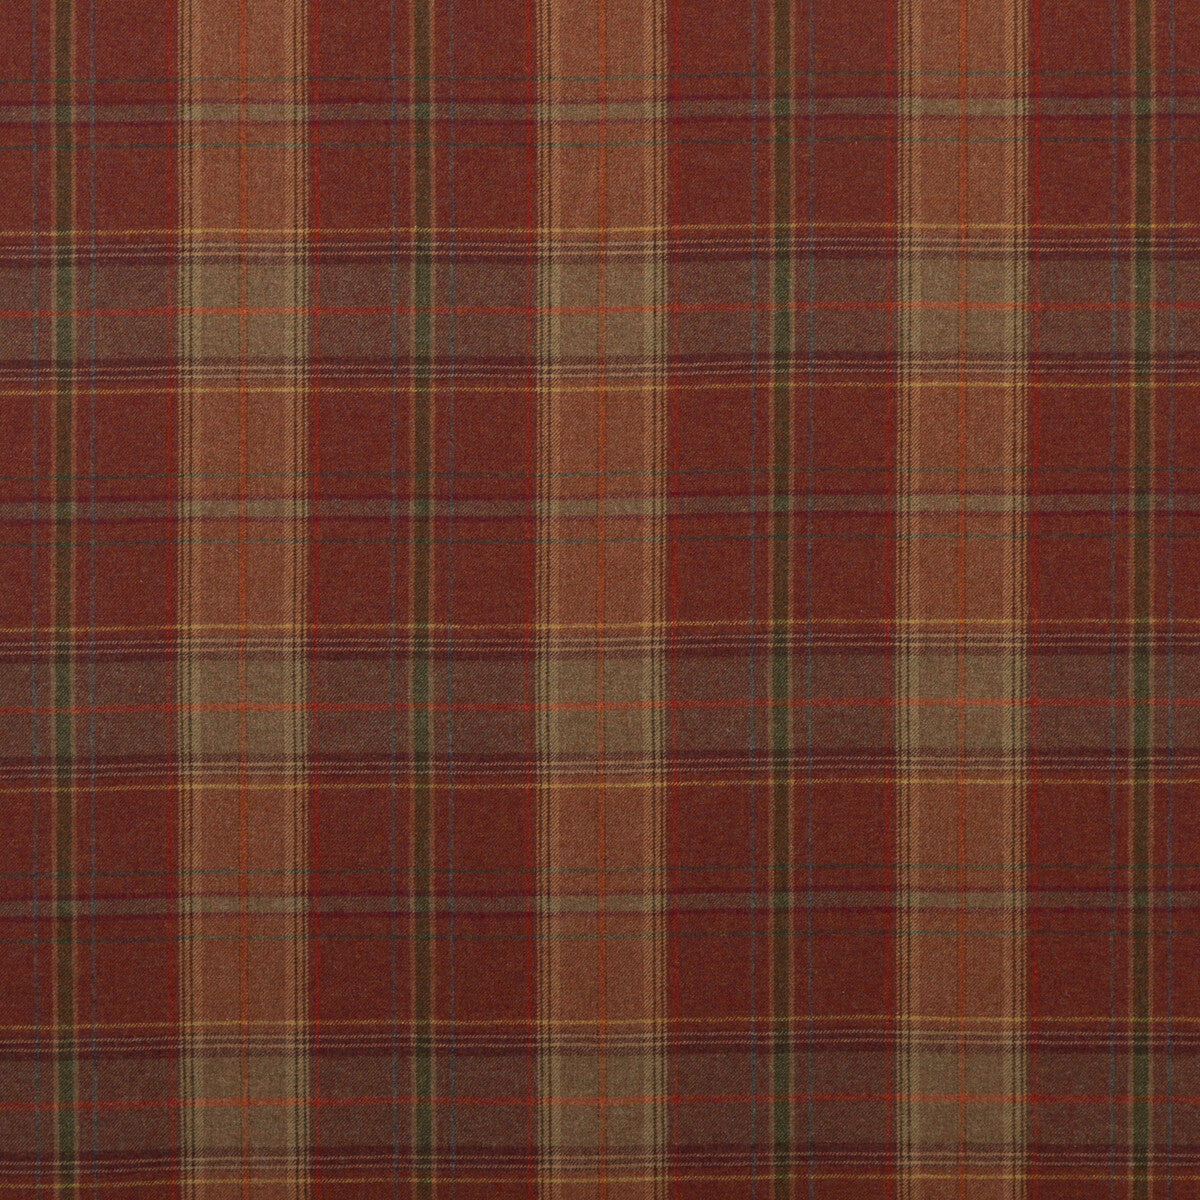 Shetland Plaid fabric in russet color - pattern FD344.V55.0 - by Mulberry in the Bohemian Romance collection